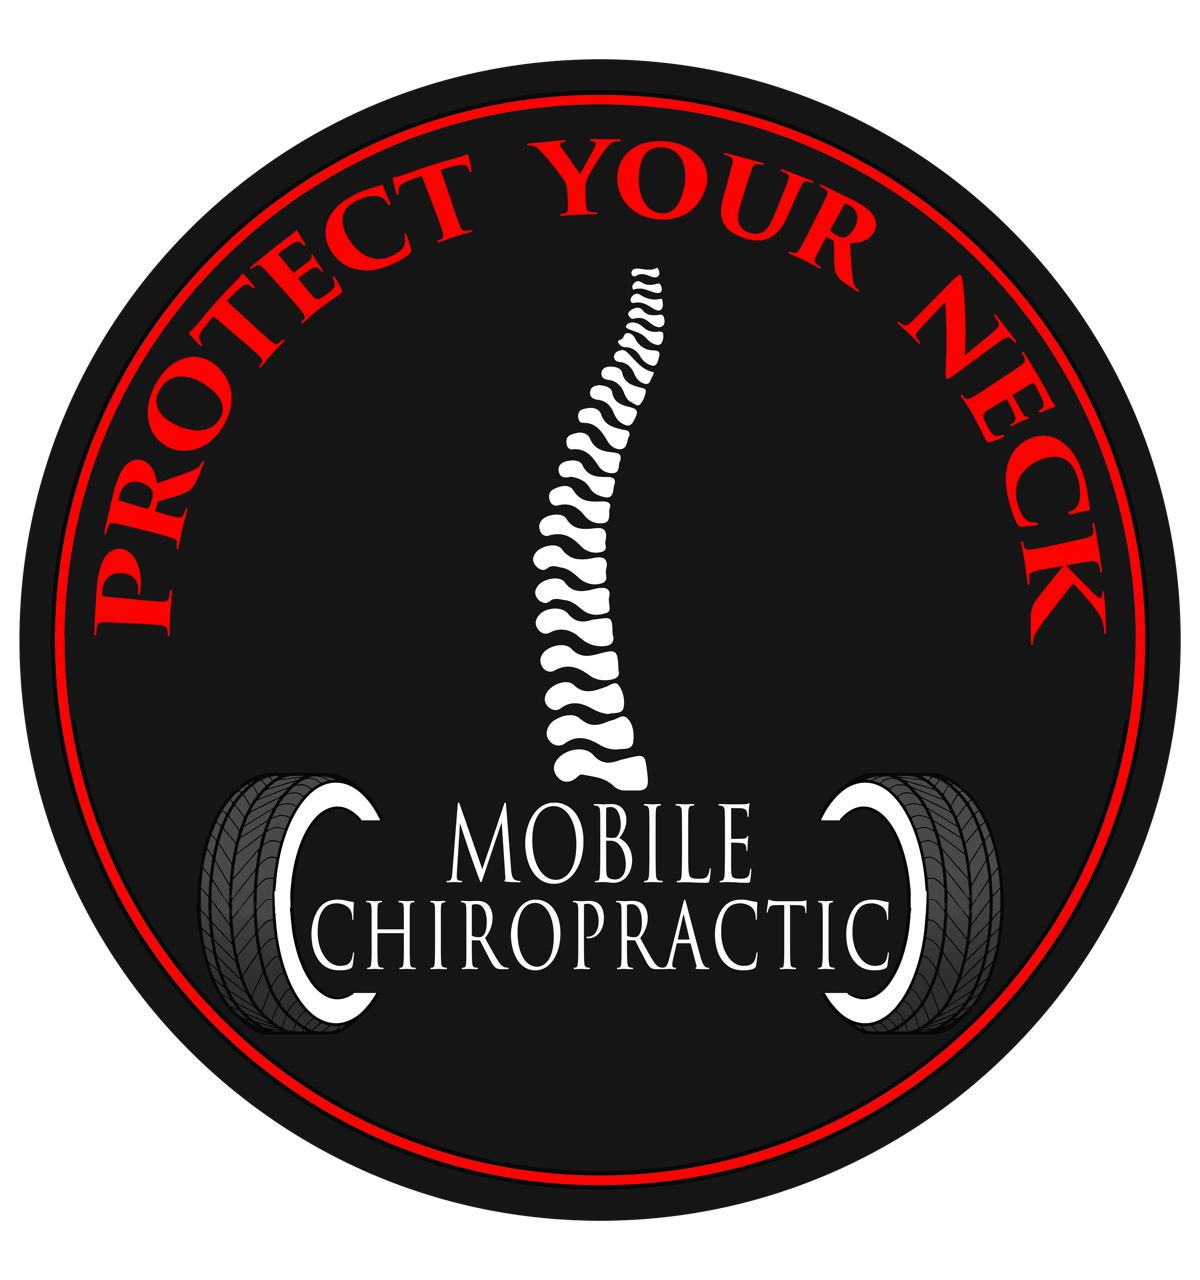 Protect Your Neck Mobile Chiropractic